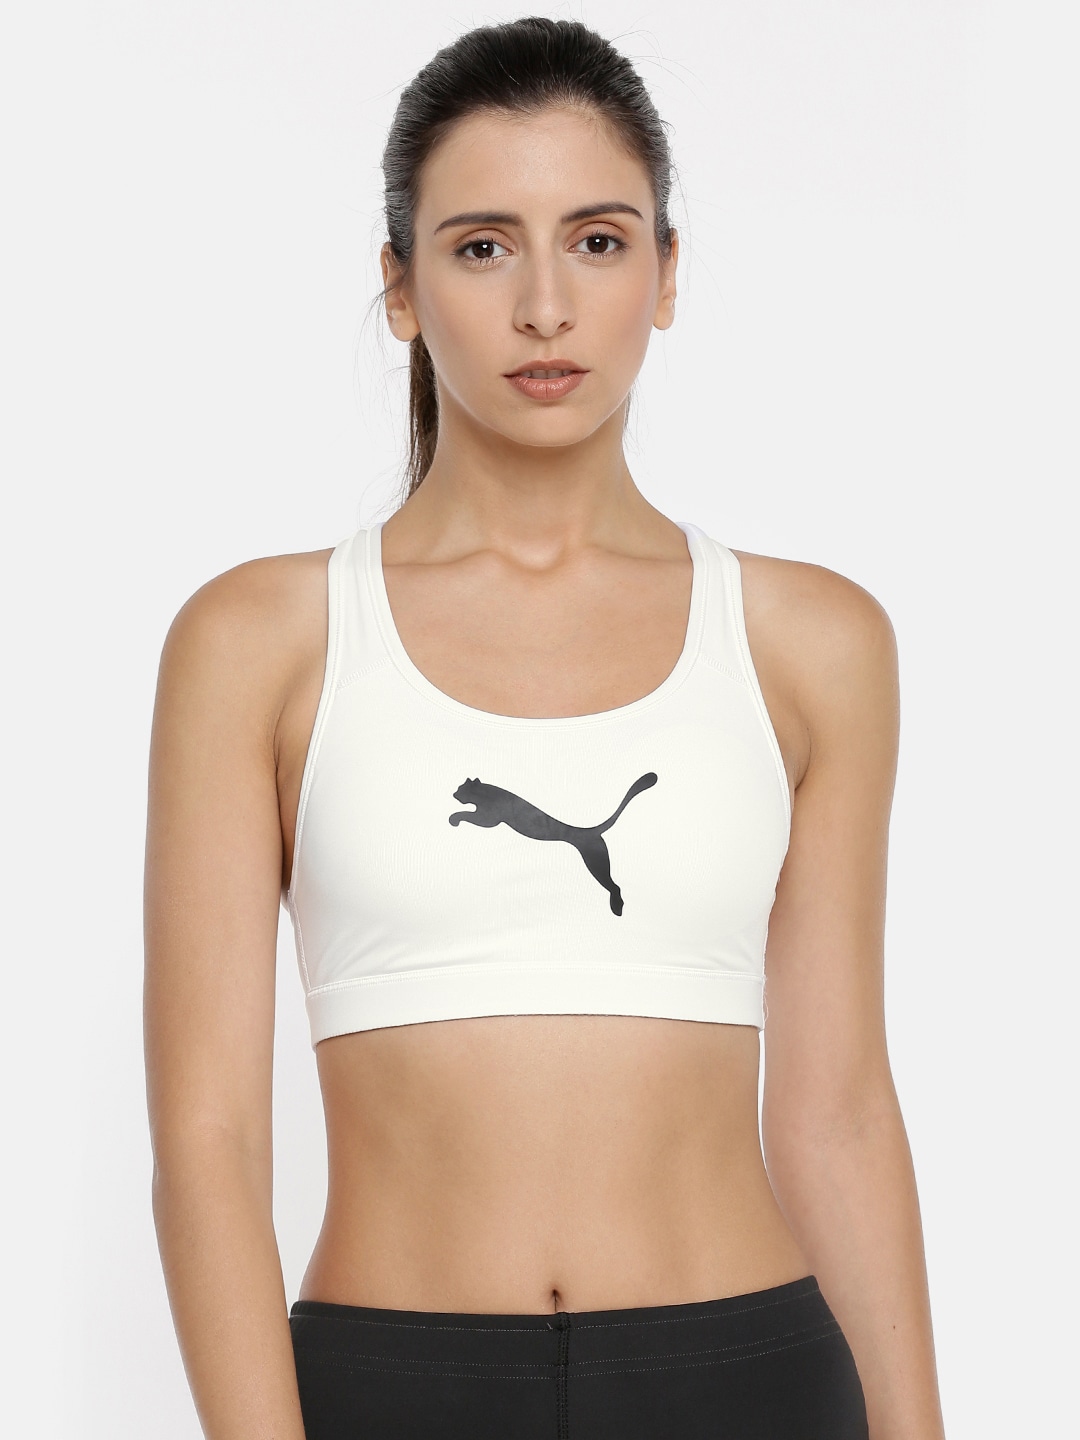 Puma White Solid Non-Wired Lightly Padded 4Keeps Sports Bra 51699808 Price in India